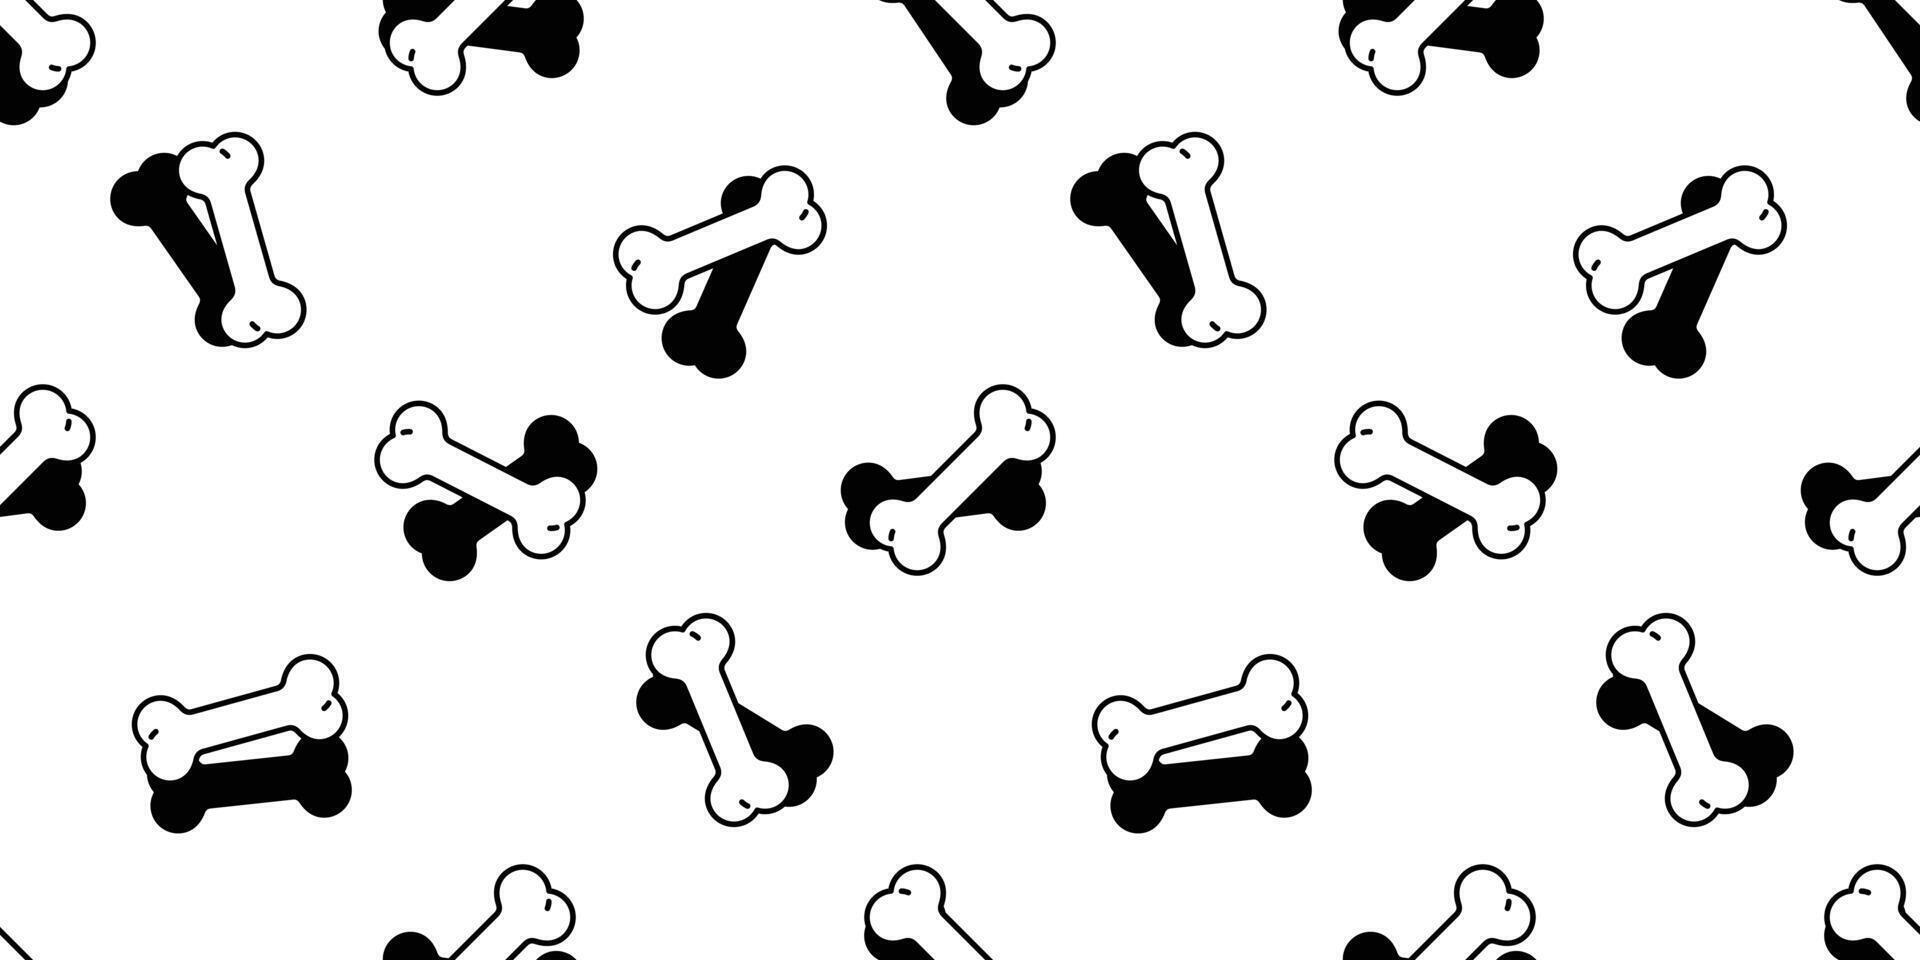 Dog bone seamless pattern vector french bulldog pet food halloween shadow cartoon scarf isolated tile background repeat wallpaper illustration doodle textile design